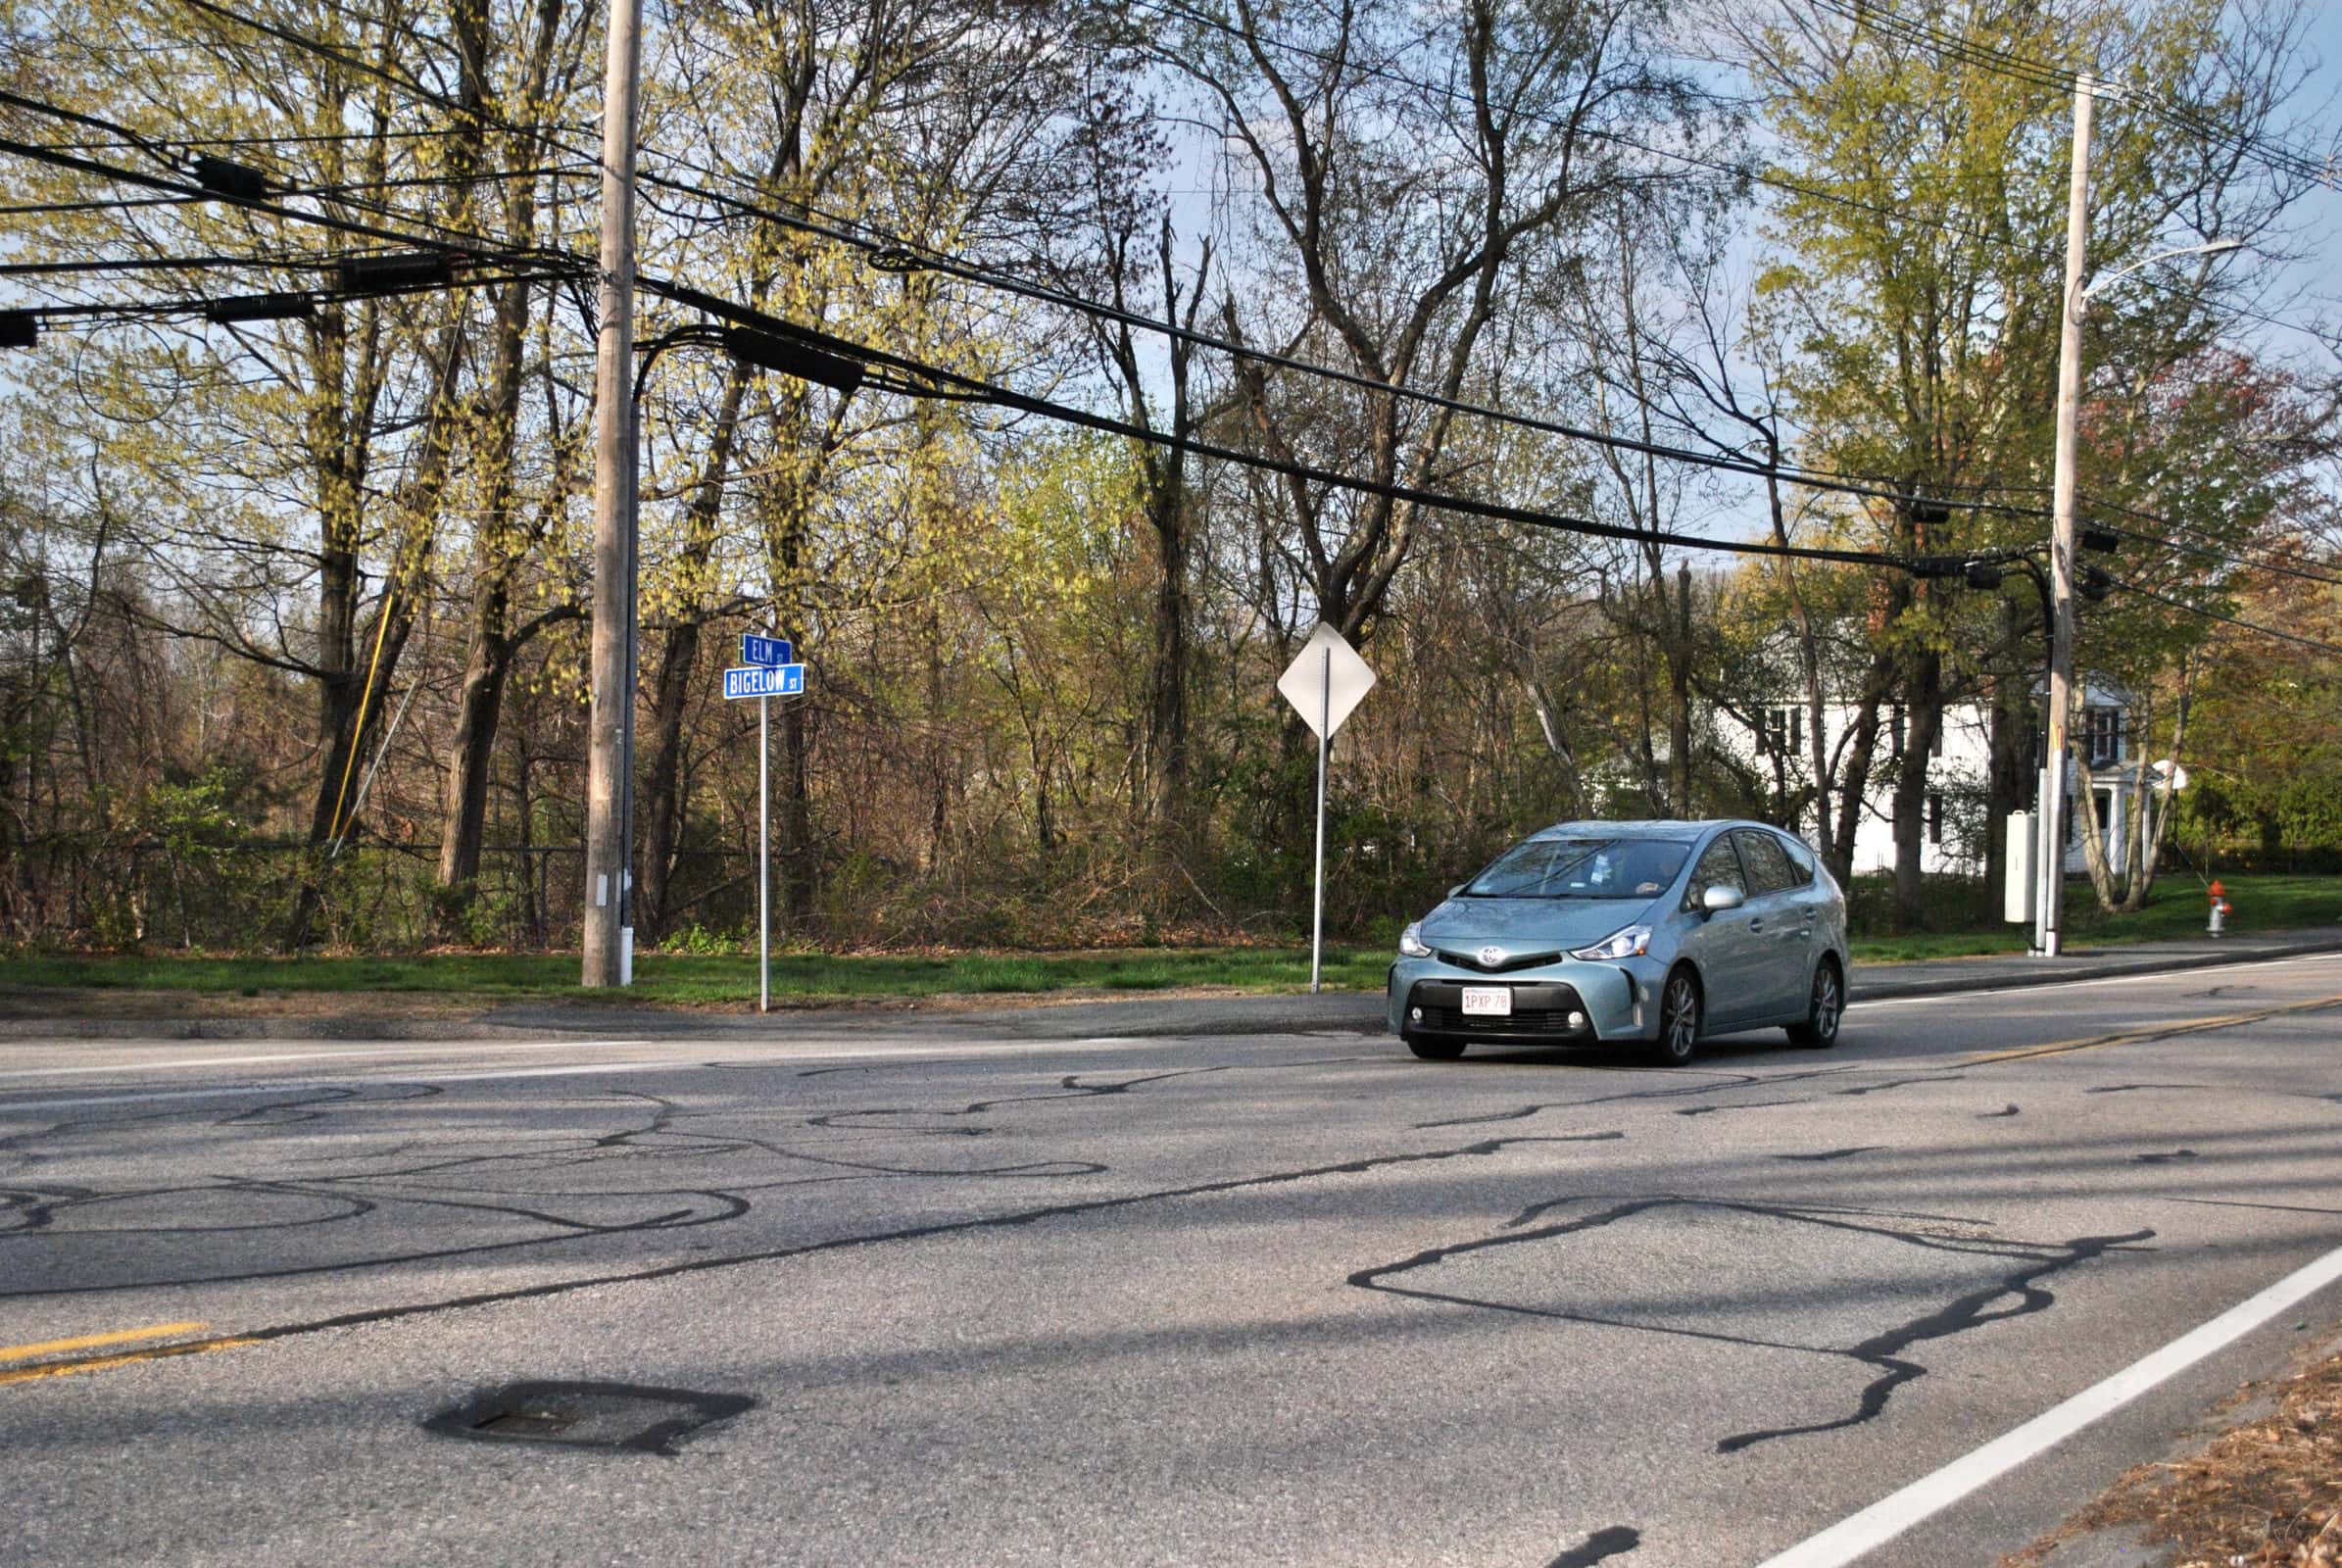 A proposed new fire station at the intersection of Elm Street and Bigelow Street would improve response times to rapidly growing commercial and residential parts of Marlborough’s West Side. Some living near the proposed site, though, have raised concerns.